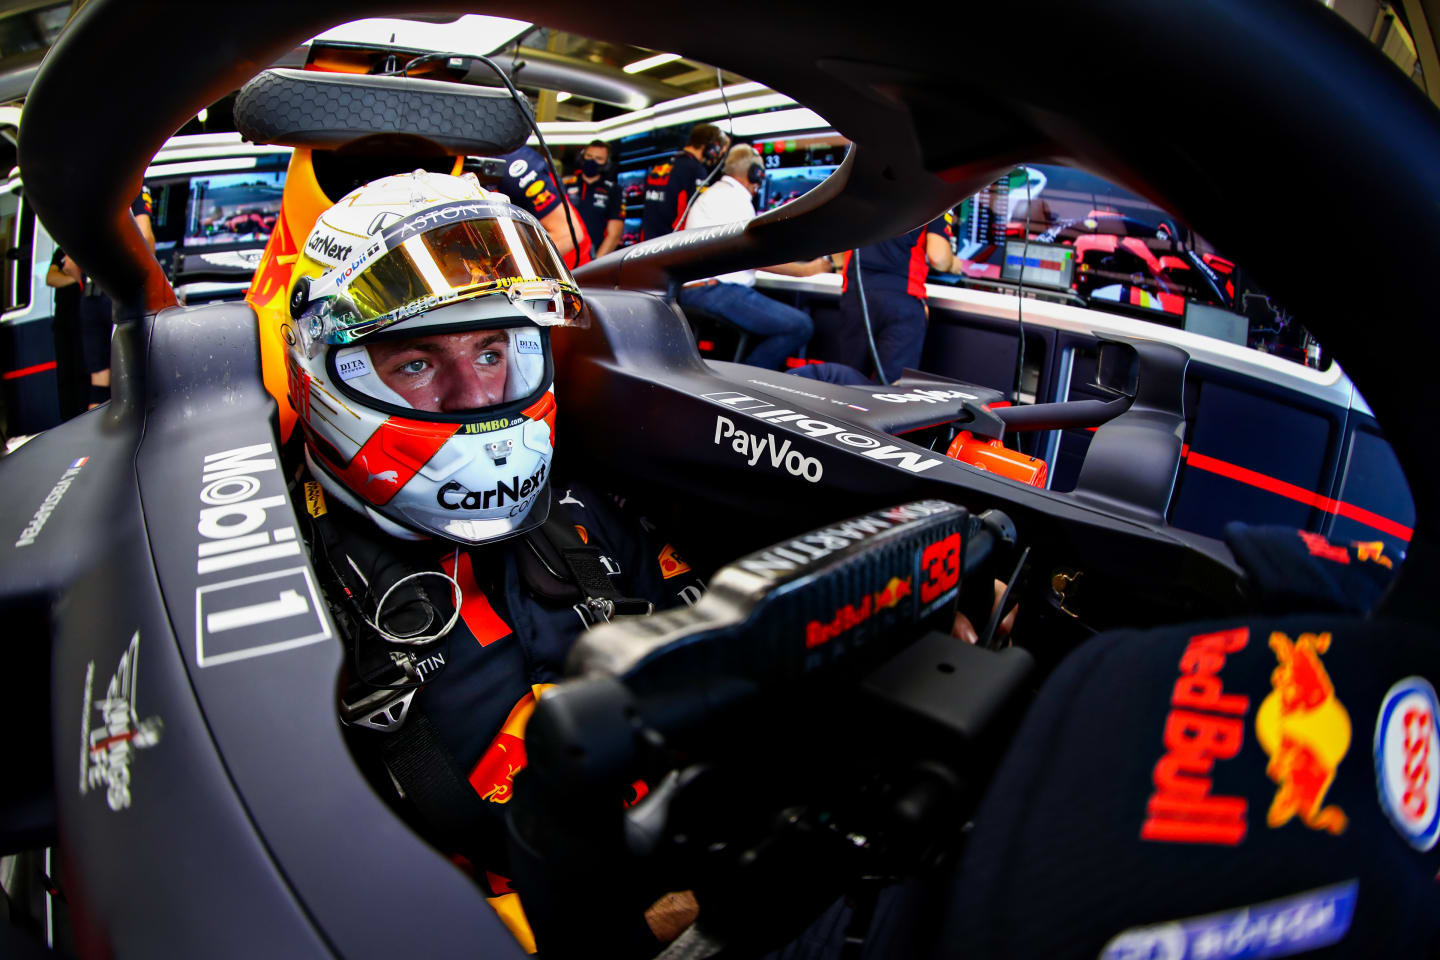 NORTHAMPTON, ENGLAND - AUGUST 08: Max Verstappen of Netherlands and Red Bull Racing prepares to